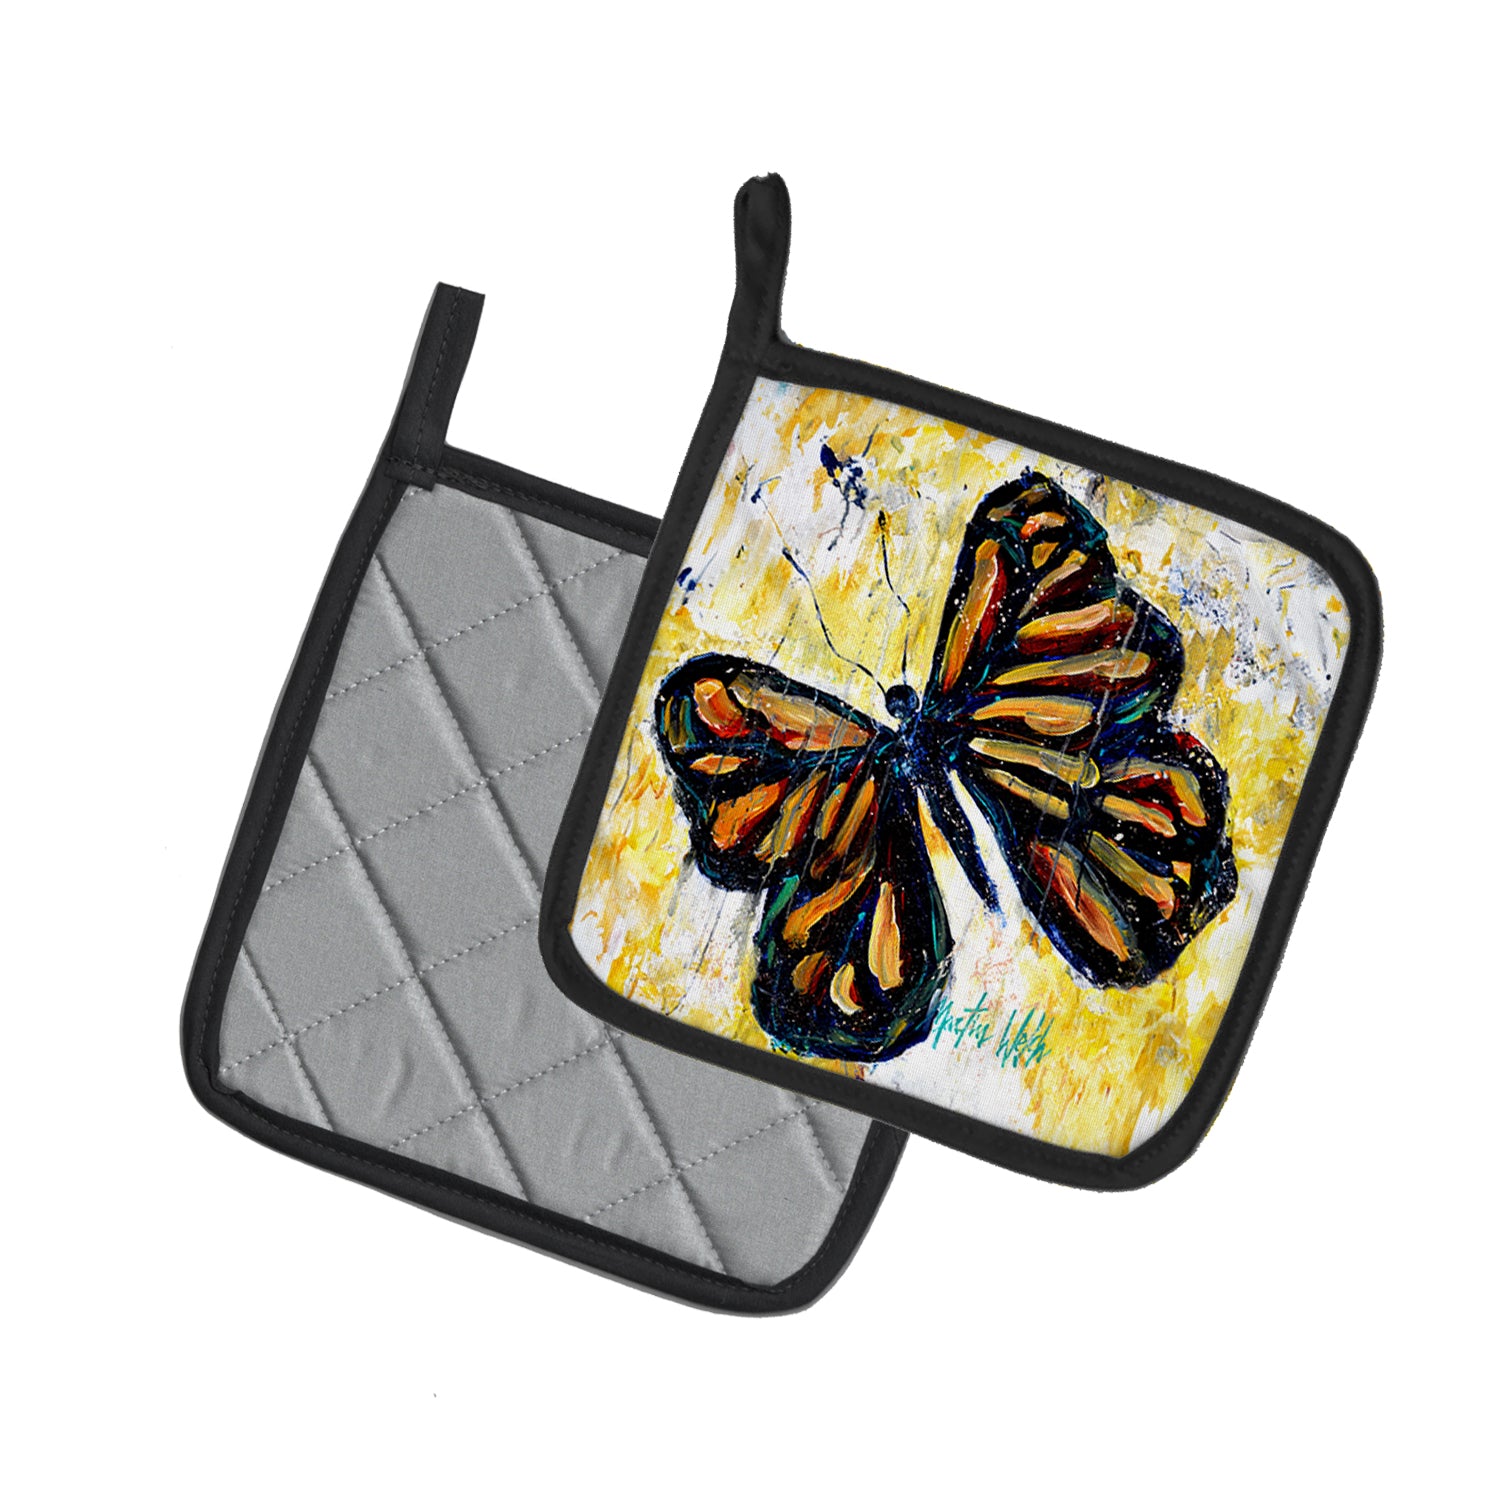 Buy this Butterfly Breeze Pair of Pot Holders